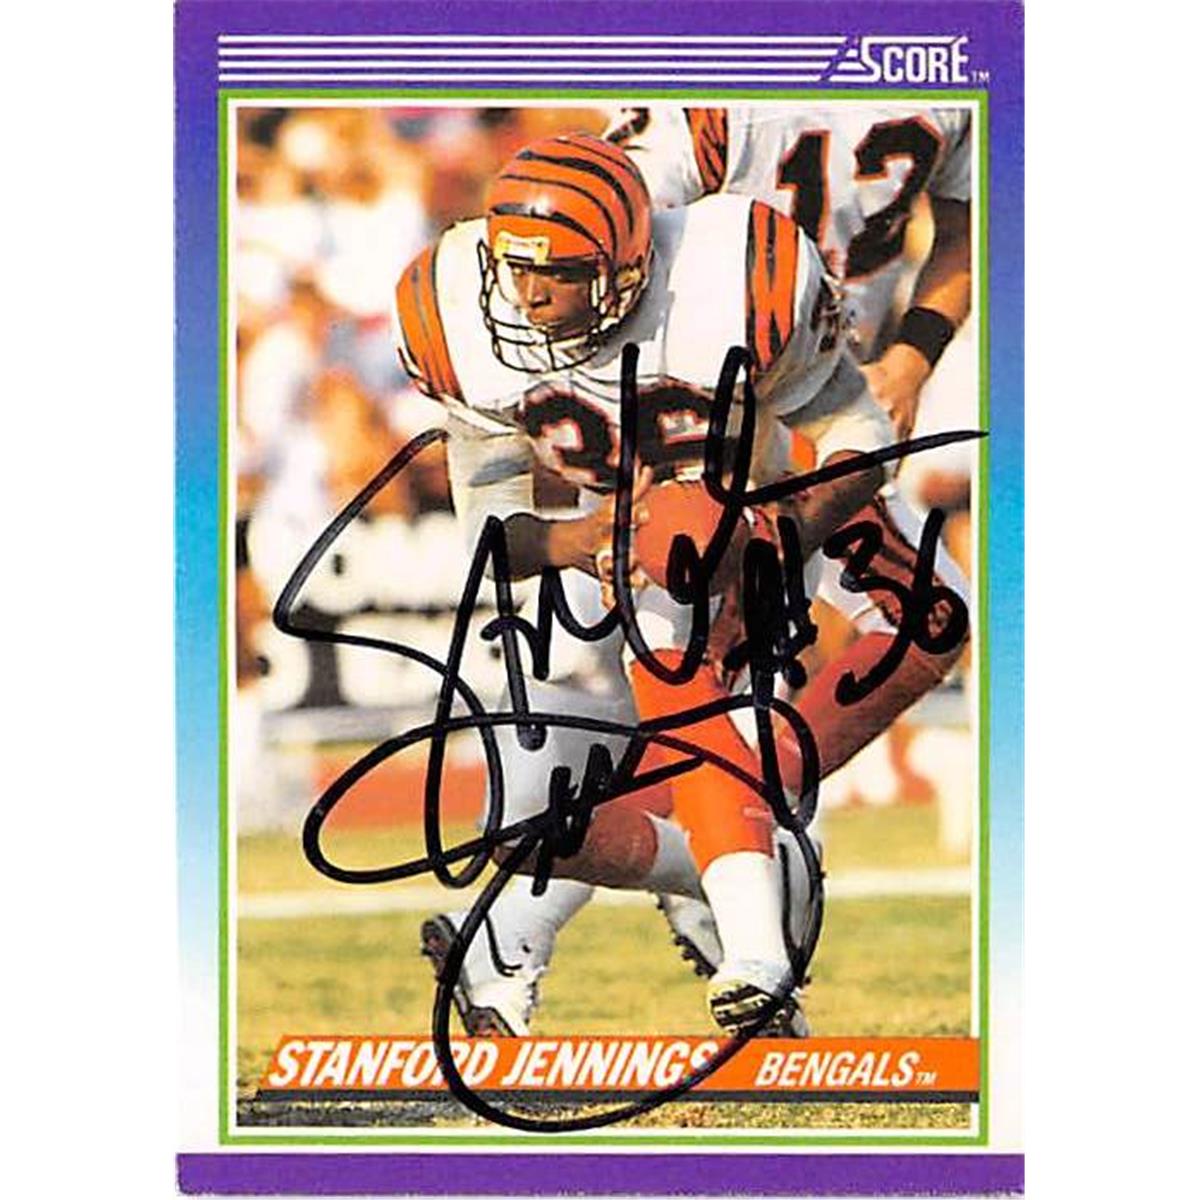 Picture of Autograph Warehouse 377222 Stanford Jennings Autographed Football Card - Cincinnati Bengals 1990 Score No.113